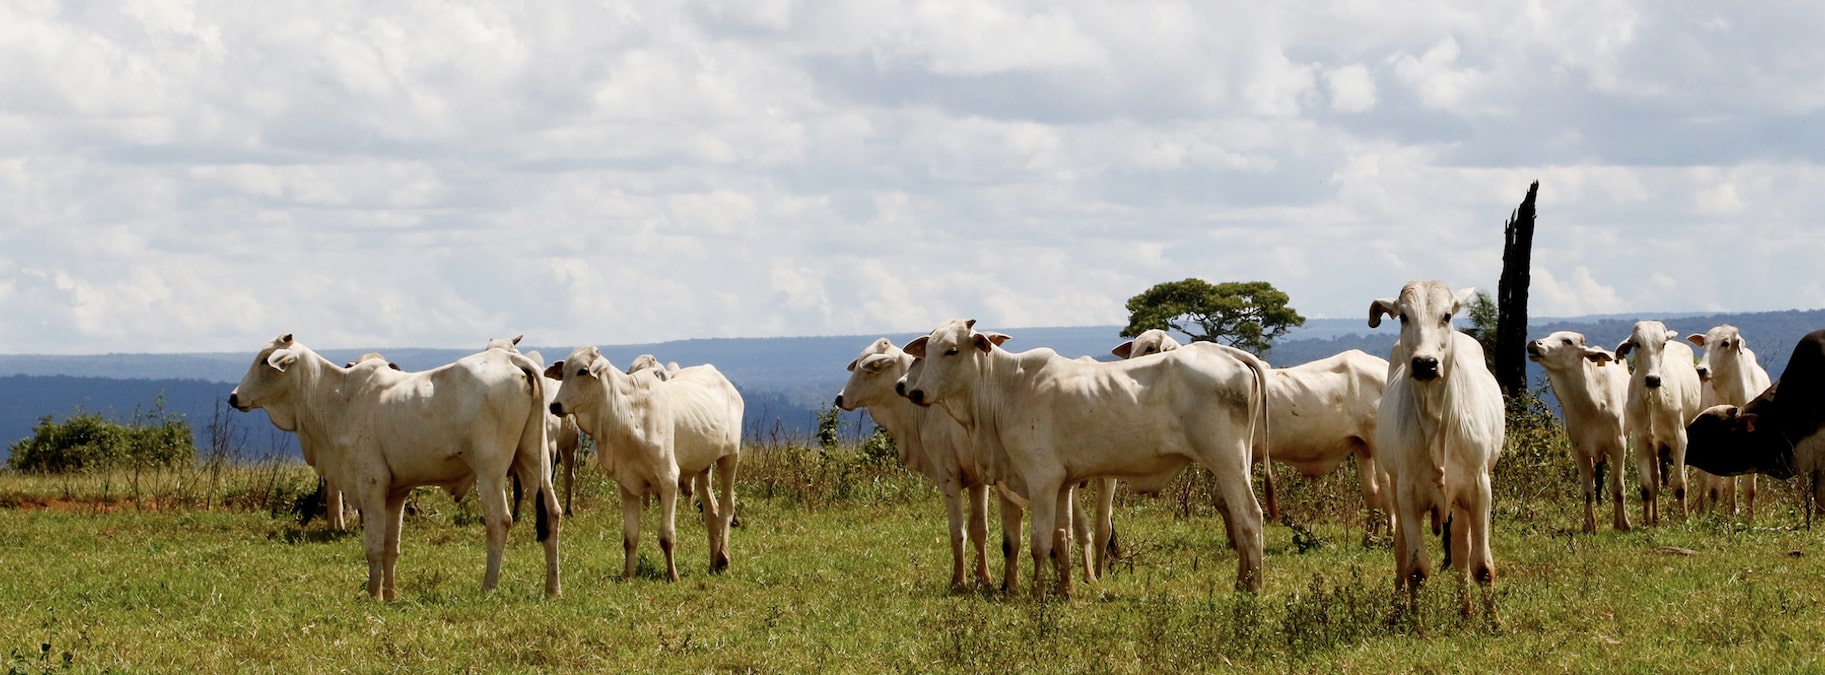 Cattle ranching is an important part of Mato Grosso’s economy